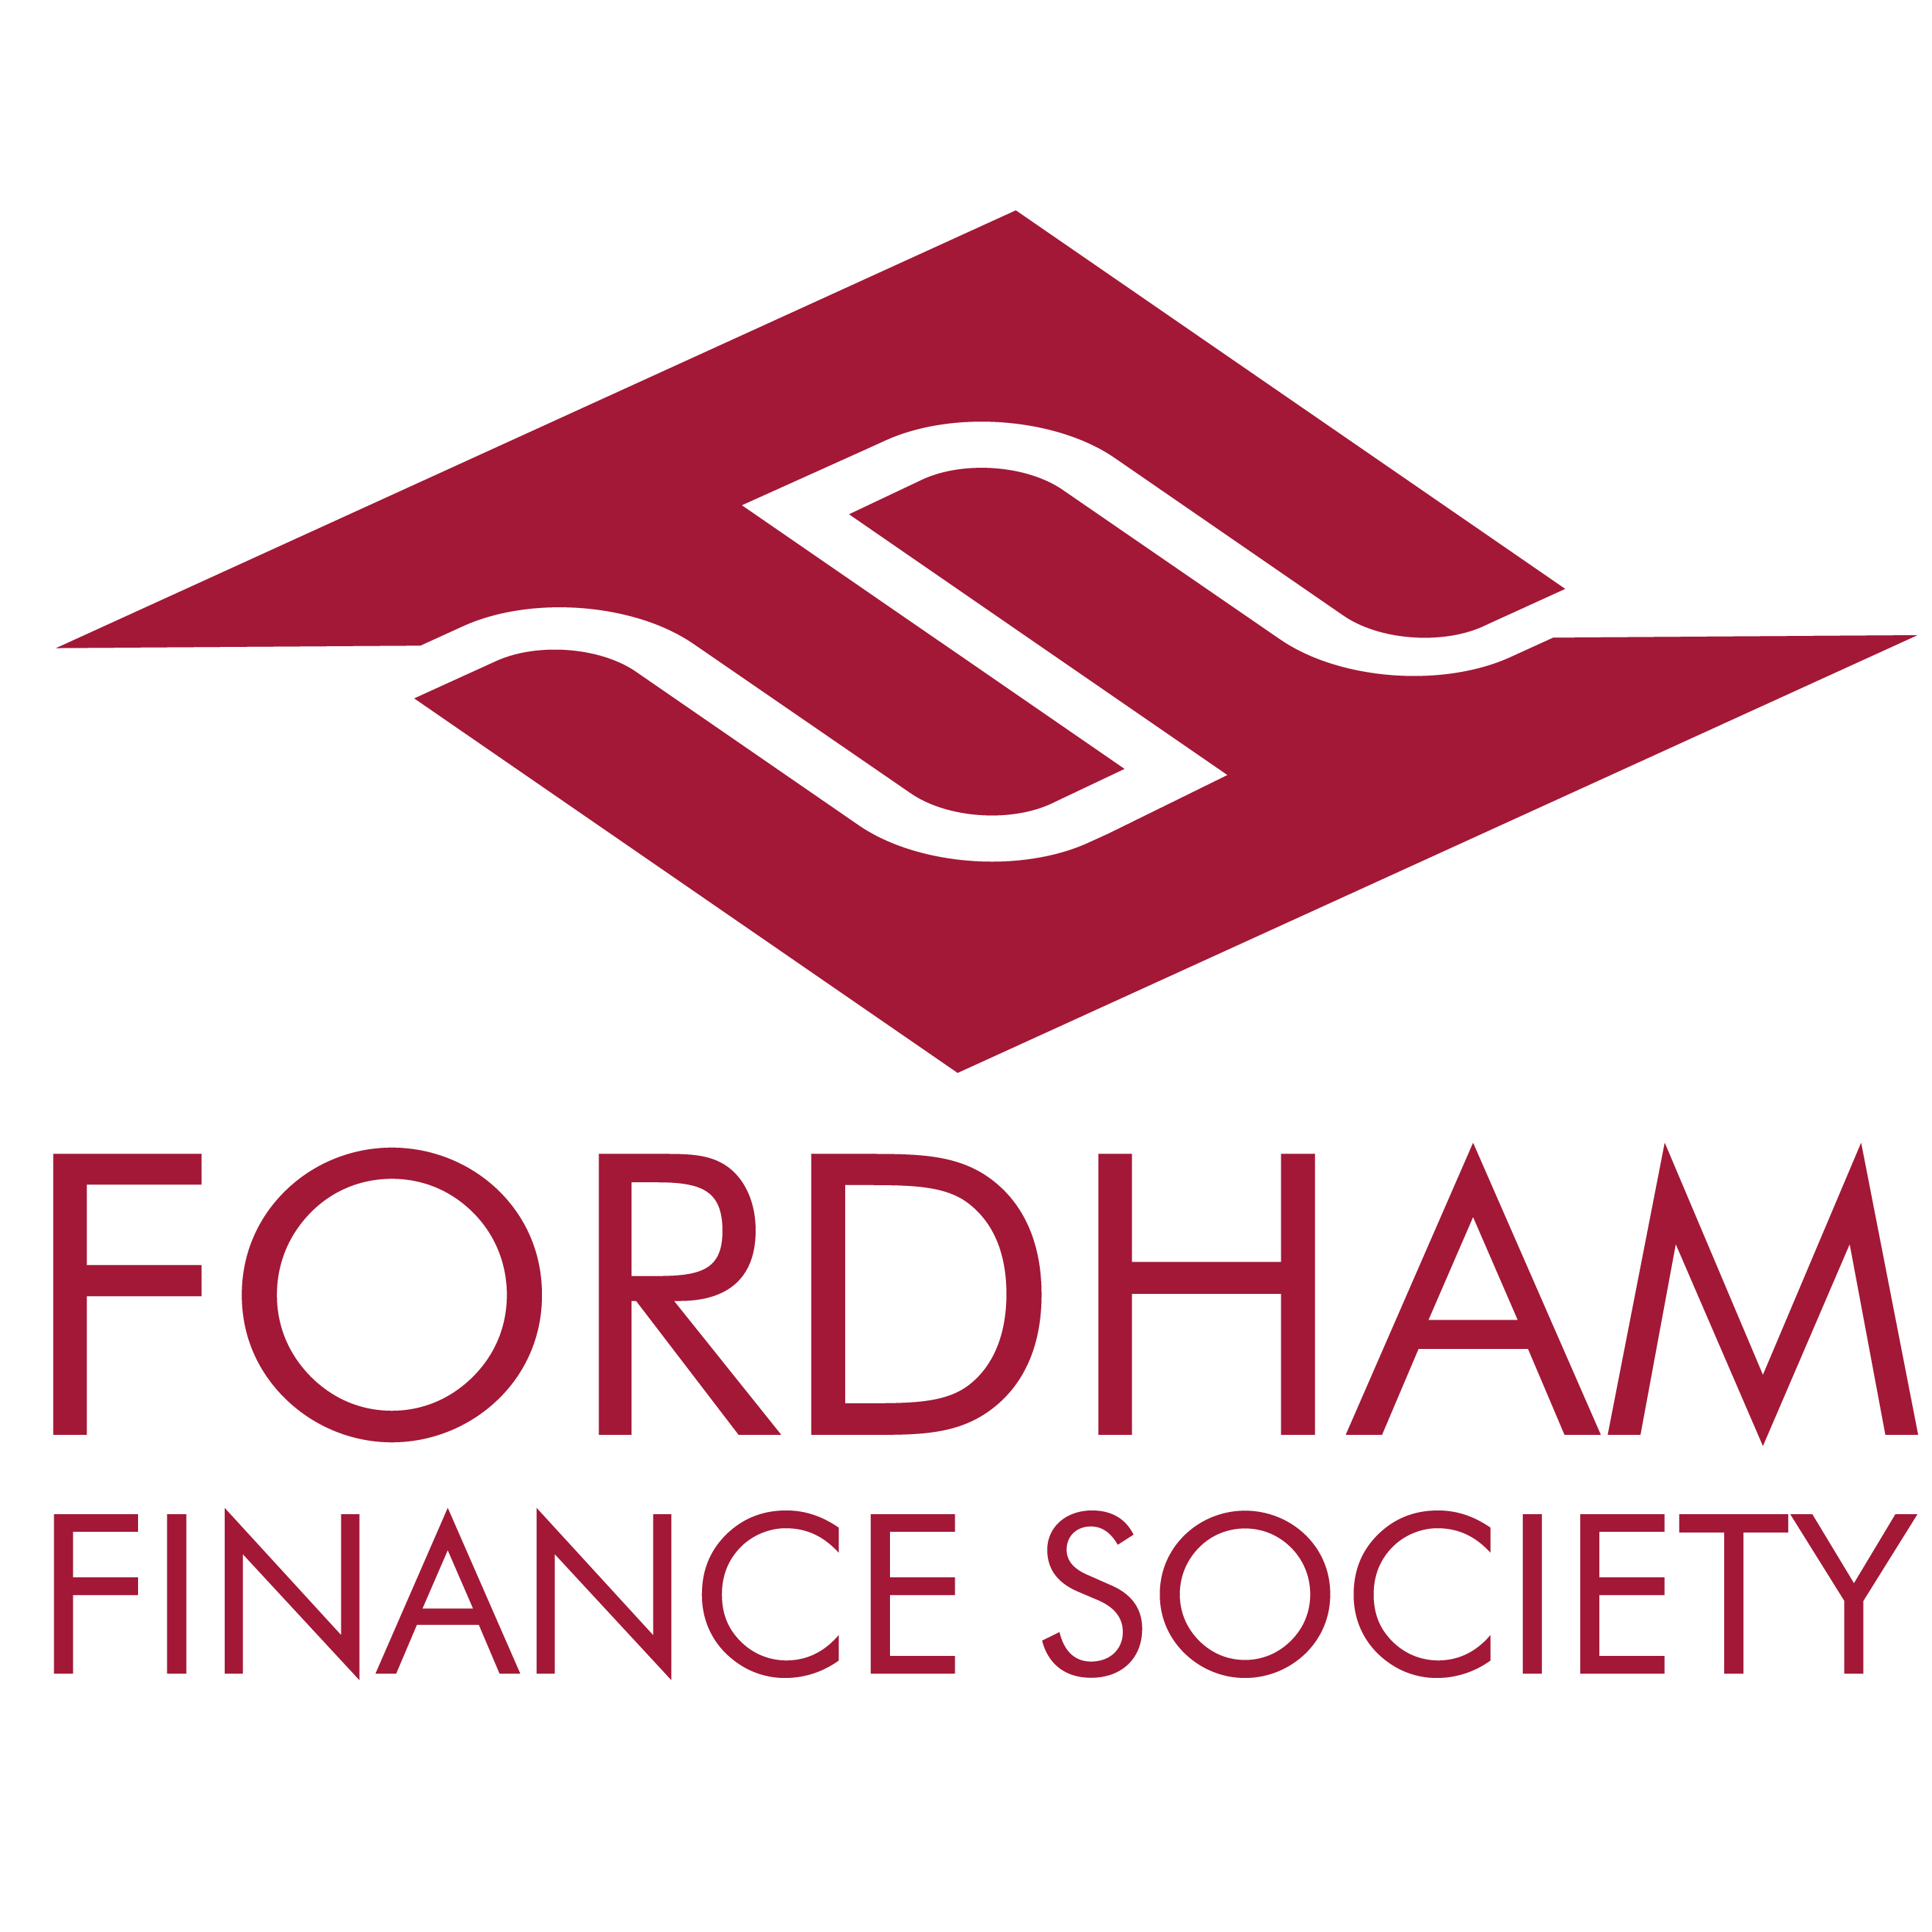 Fordham Graduate Finance Society. 

Follow us for event updates, news, & more.